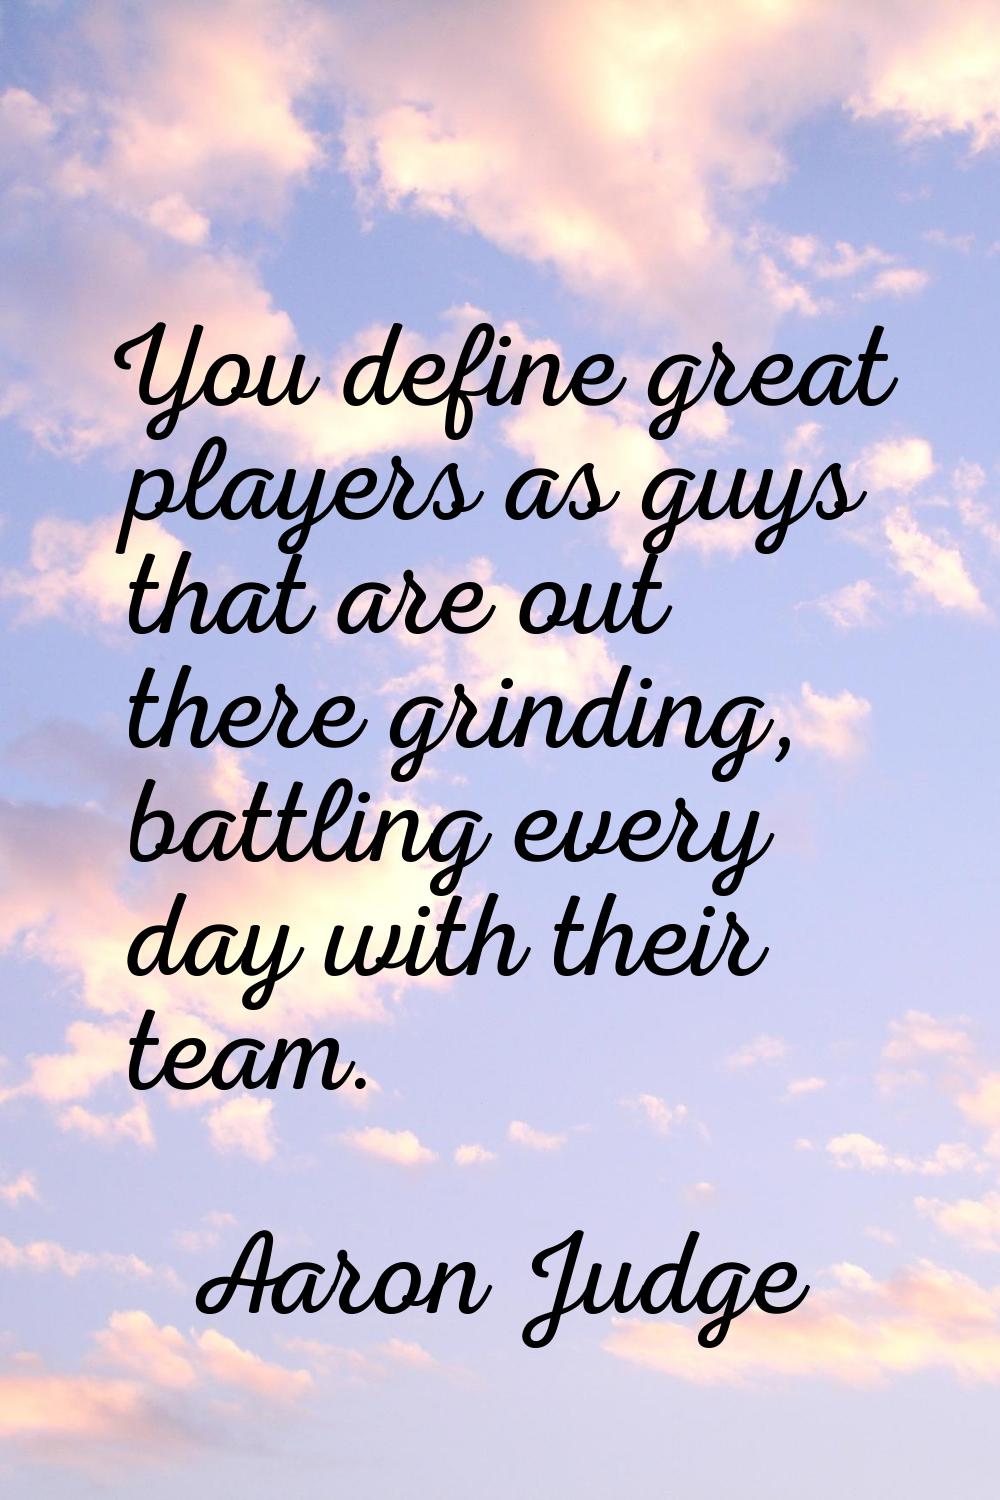 You define great players as guys that are out there grinding, battling every day with their team.